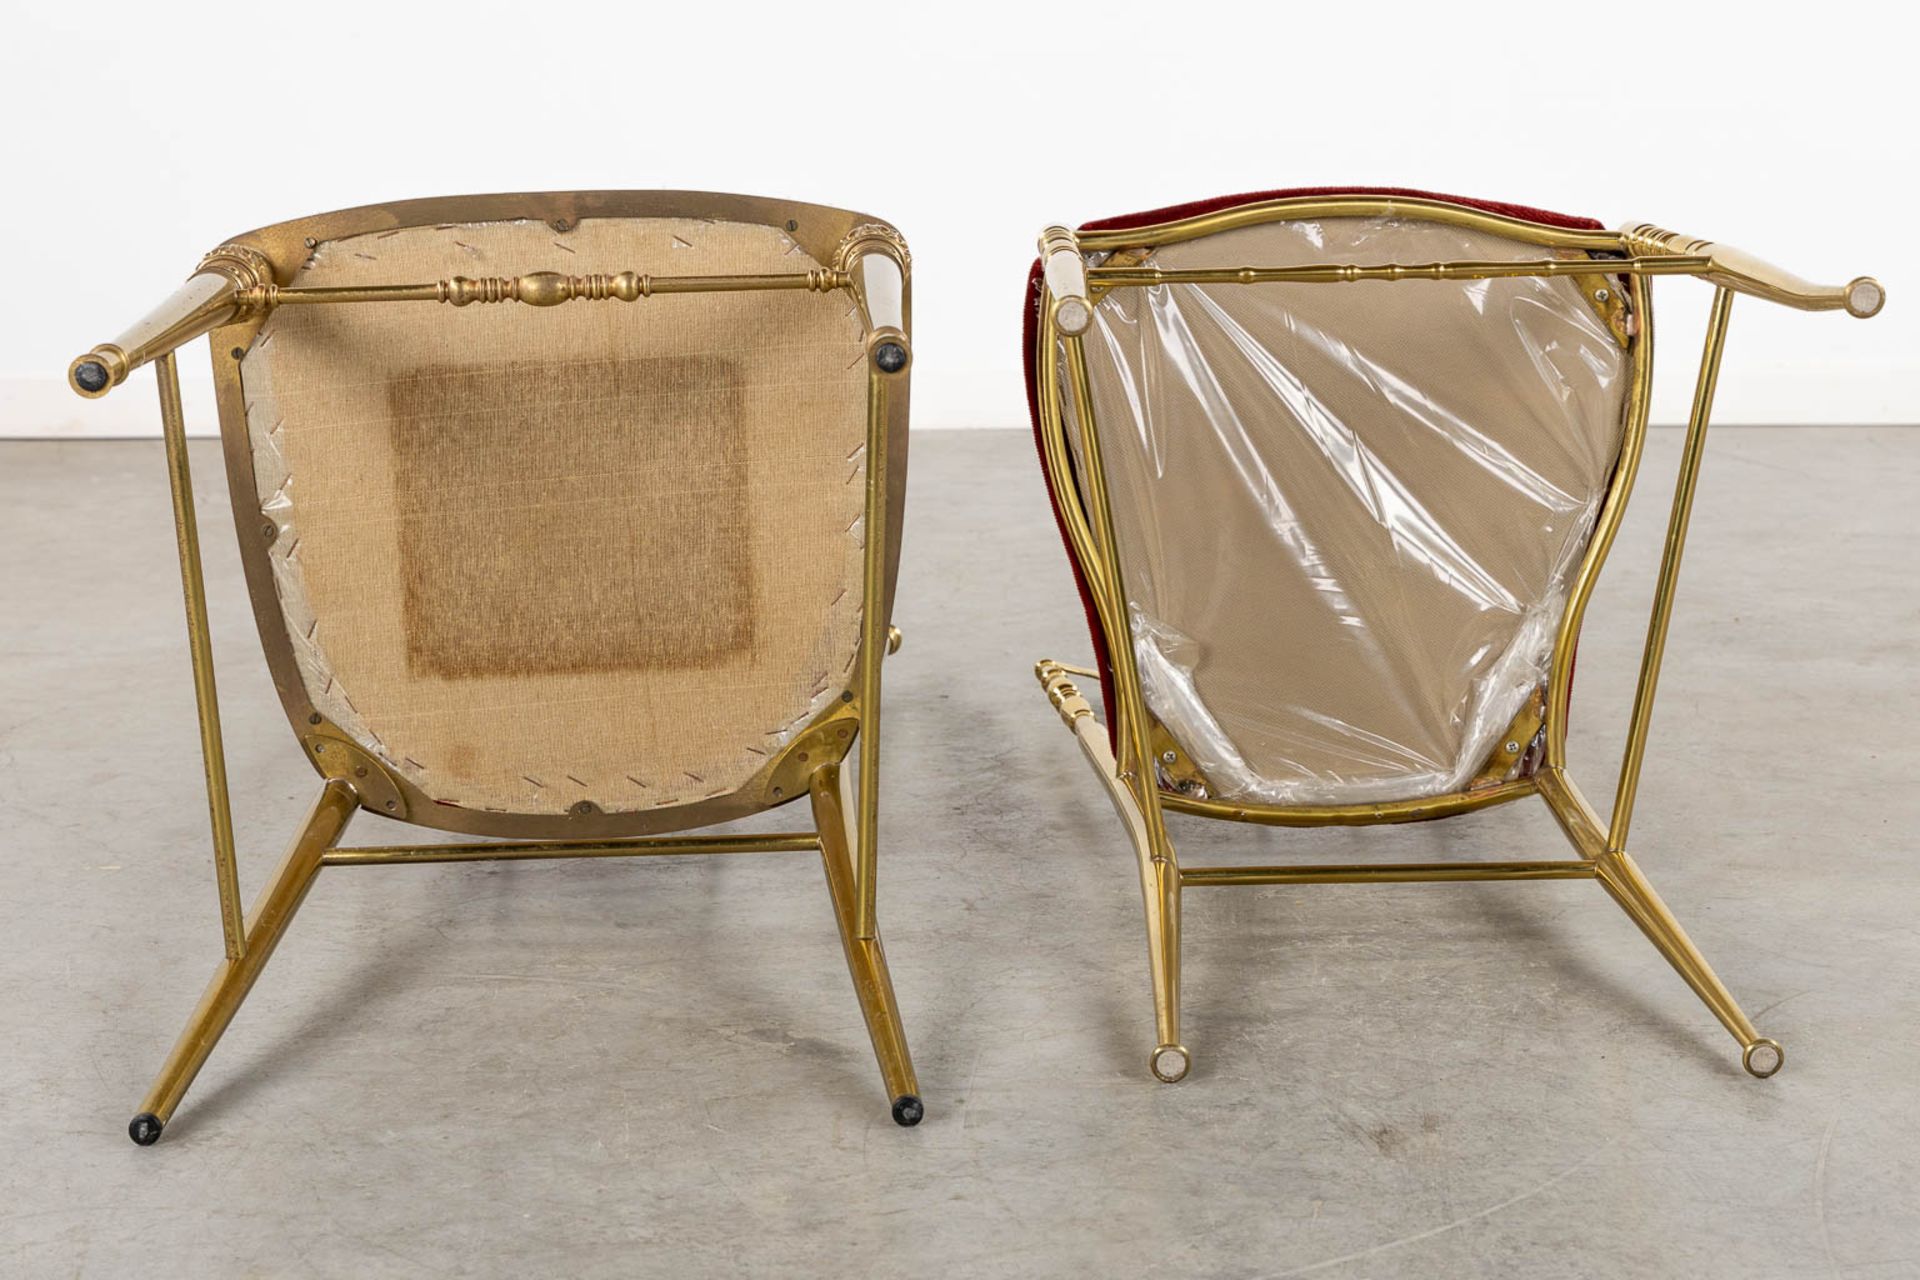 Two Metal and gilt chairs, circa 1970. (L:40 x W:40 x H:108 cm) - Image 7 of 10